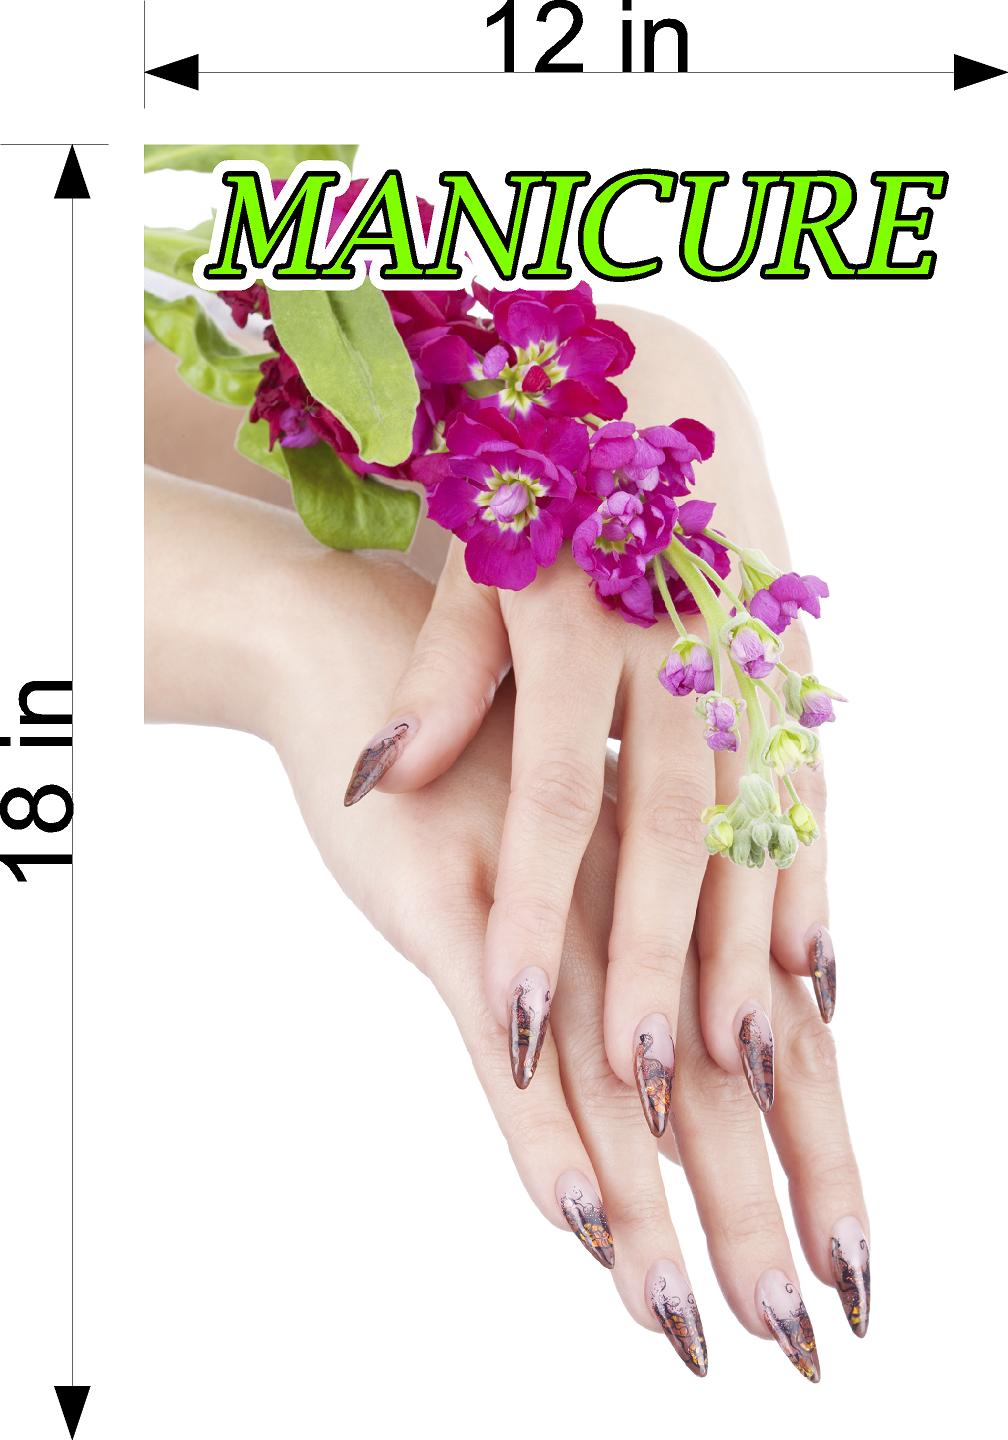 Manicure 02 Wallpaper Poster Decal with Adhesive Backing Wall Sticker Decor Indoors Interior Sign Vertical